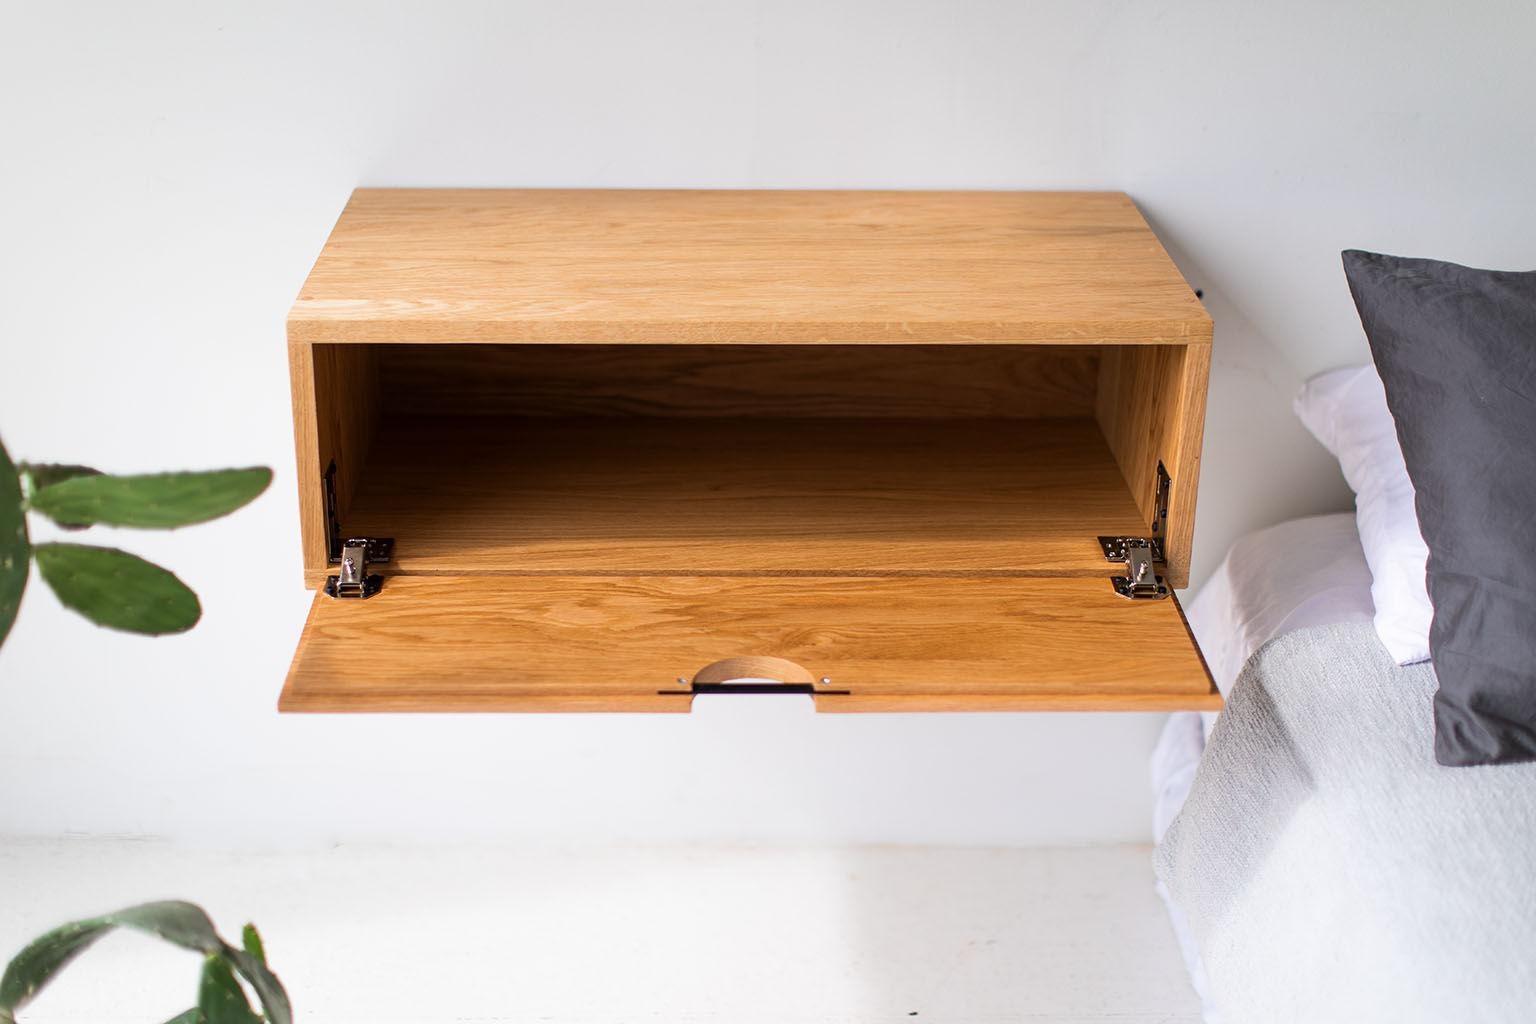 This piece ships free in the continental United States!
Price includes free white glove shipping.

This simple floating nightstand from the Cali Collection is made in the heart of Ohio with locally sourced wood. Each unit is handmade with solid